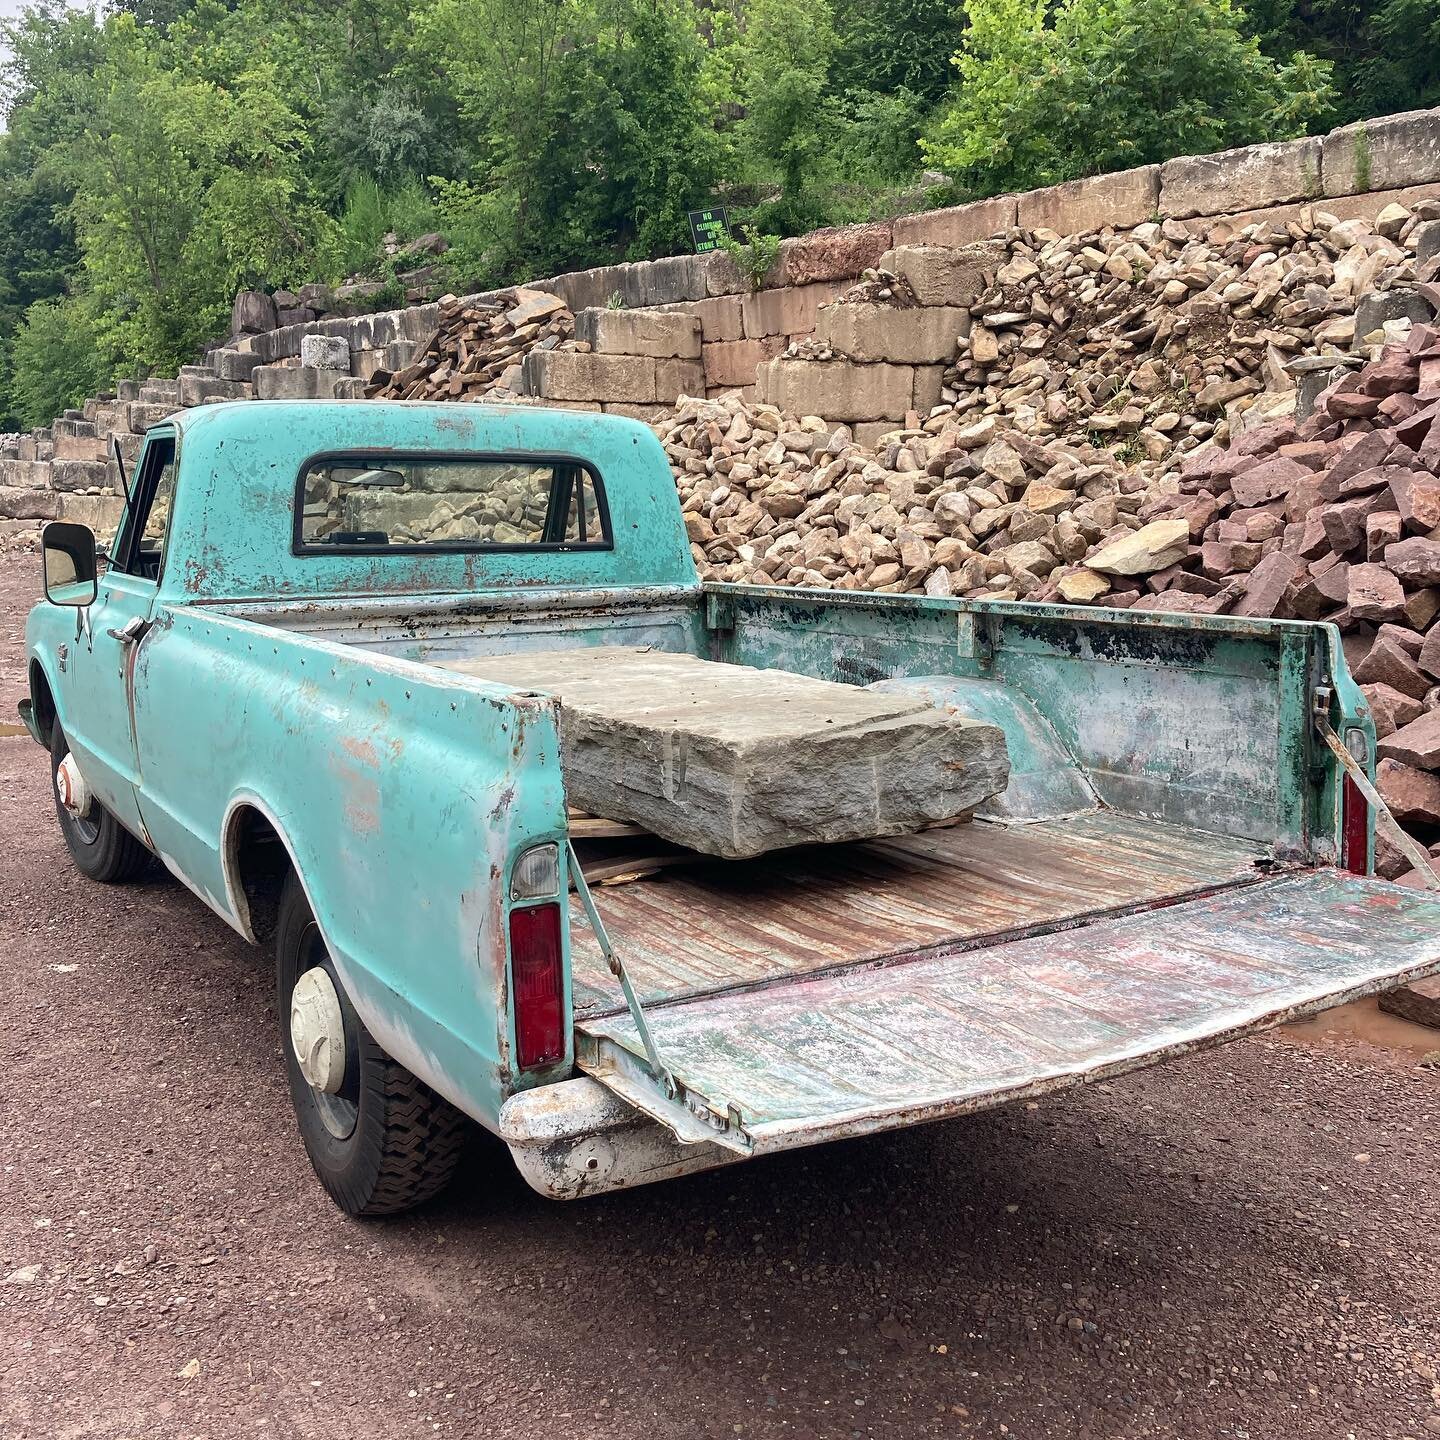 Old blue at it again!! Picking up sculptures bases for some new works in progress. #sculture #sculptor #quarry #delawarequarry #bucks #buckcounty